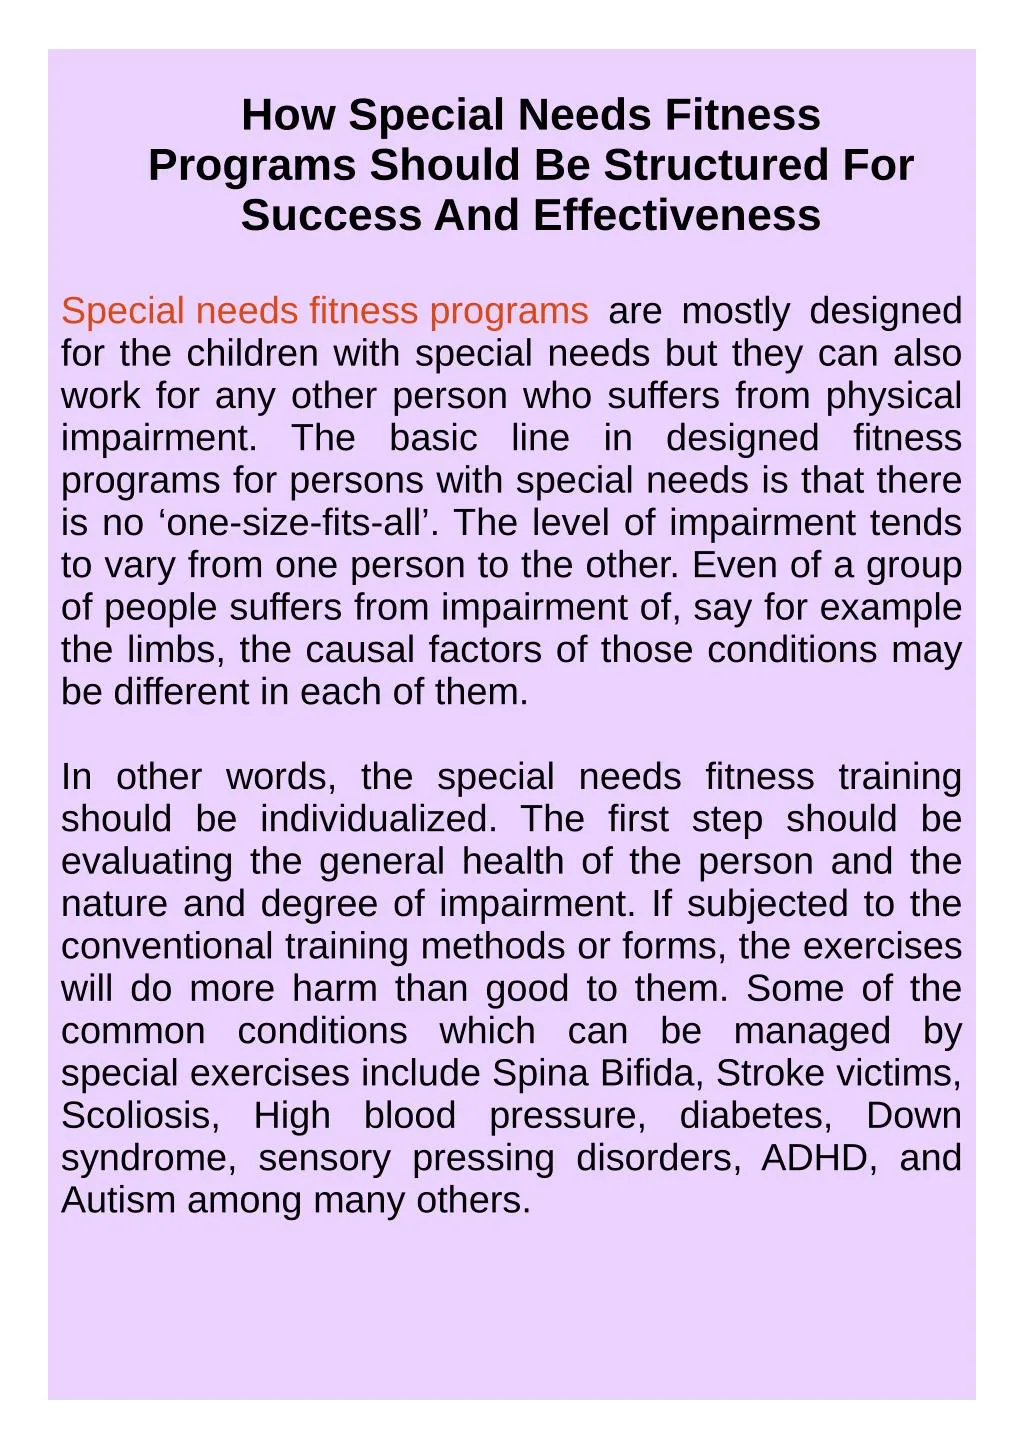 how special needs fitness programs should